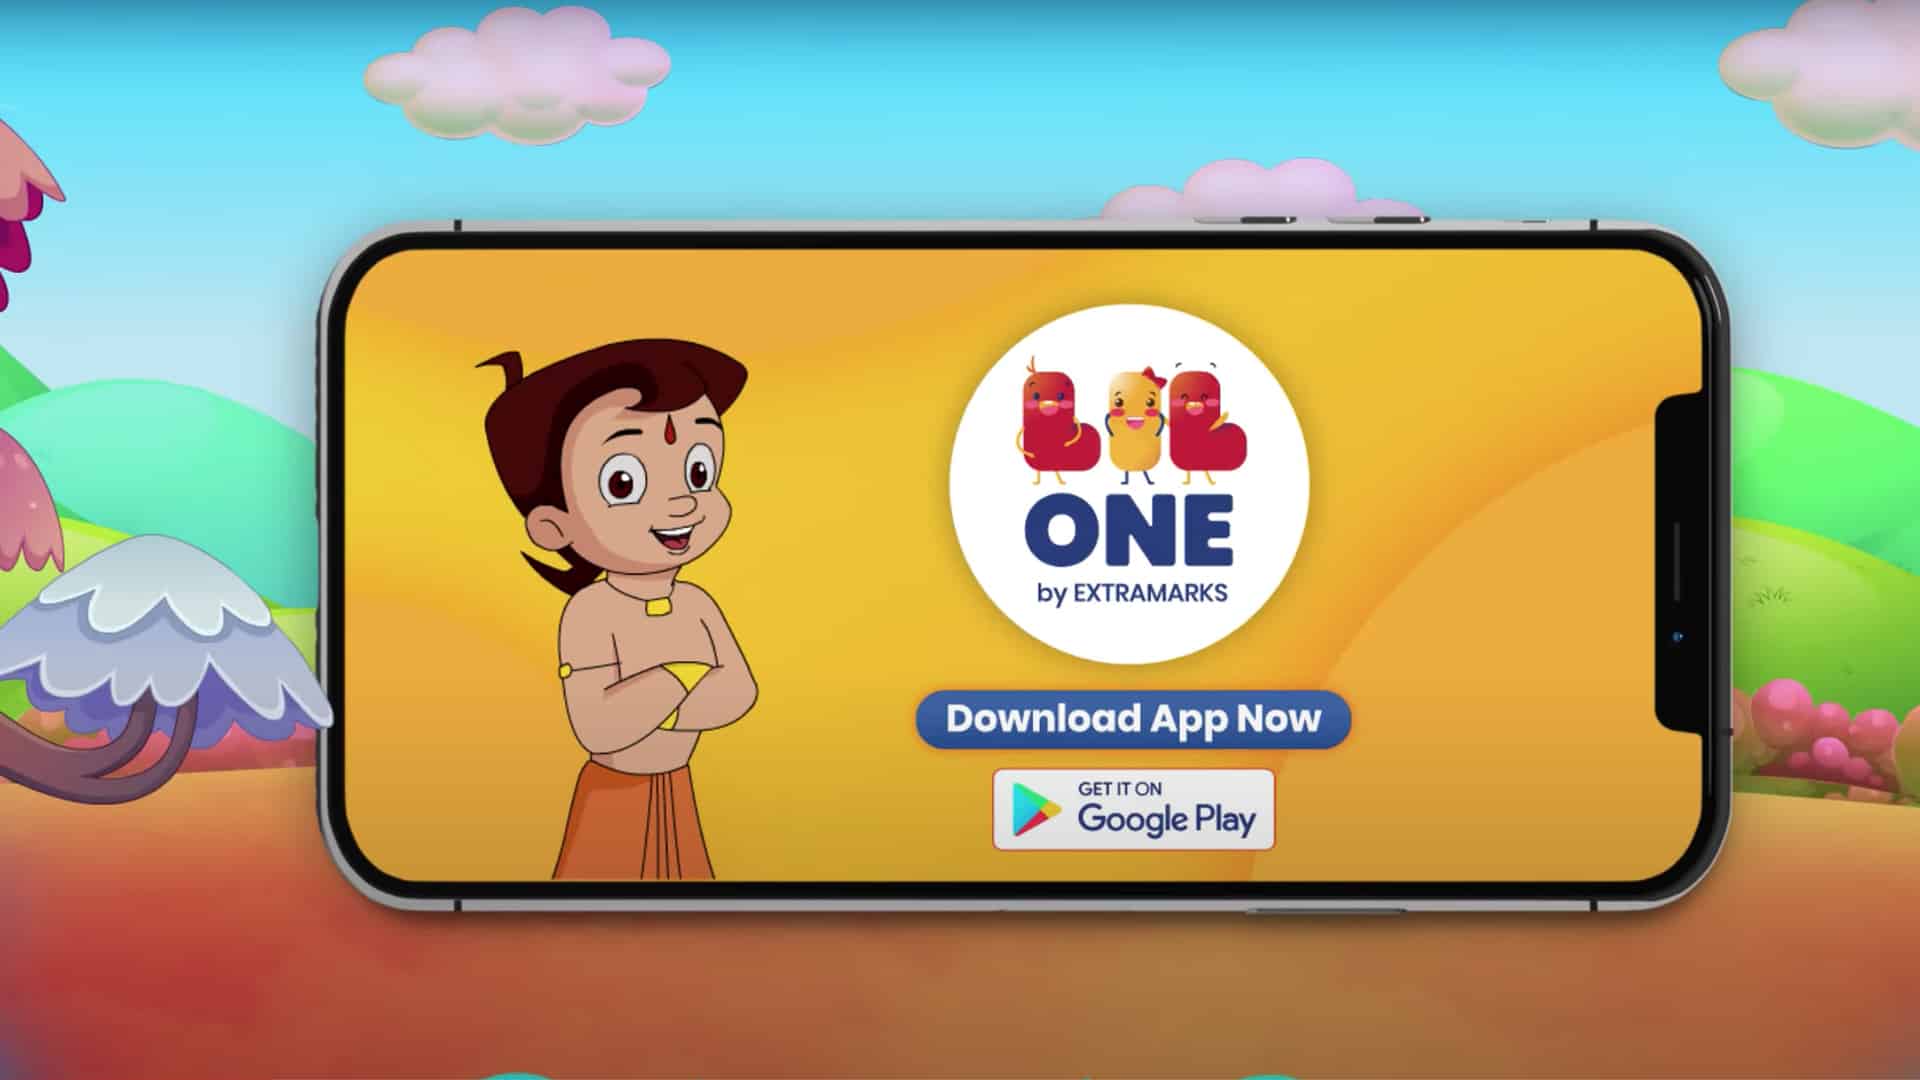 Extramarks Education Adds Another Feather to its Cap; Launches New App Lil One by Extramarks for Early Childhood Learning